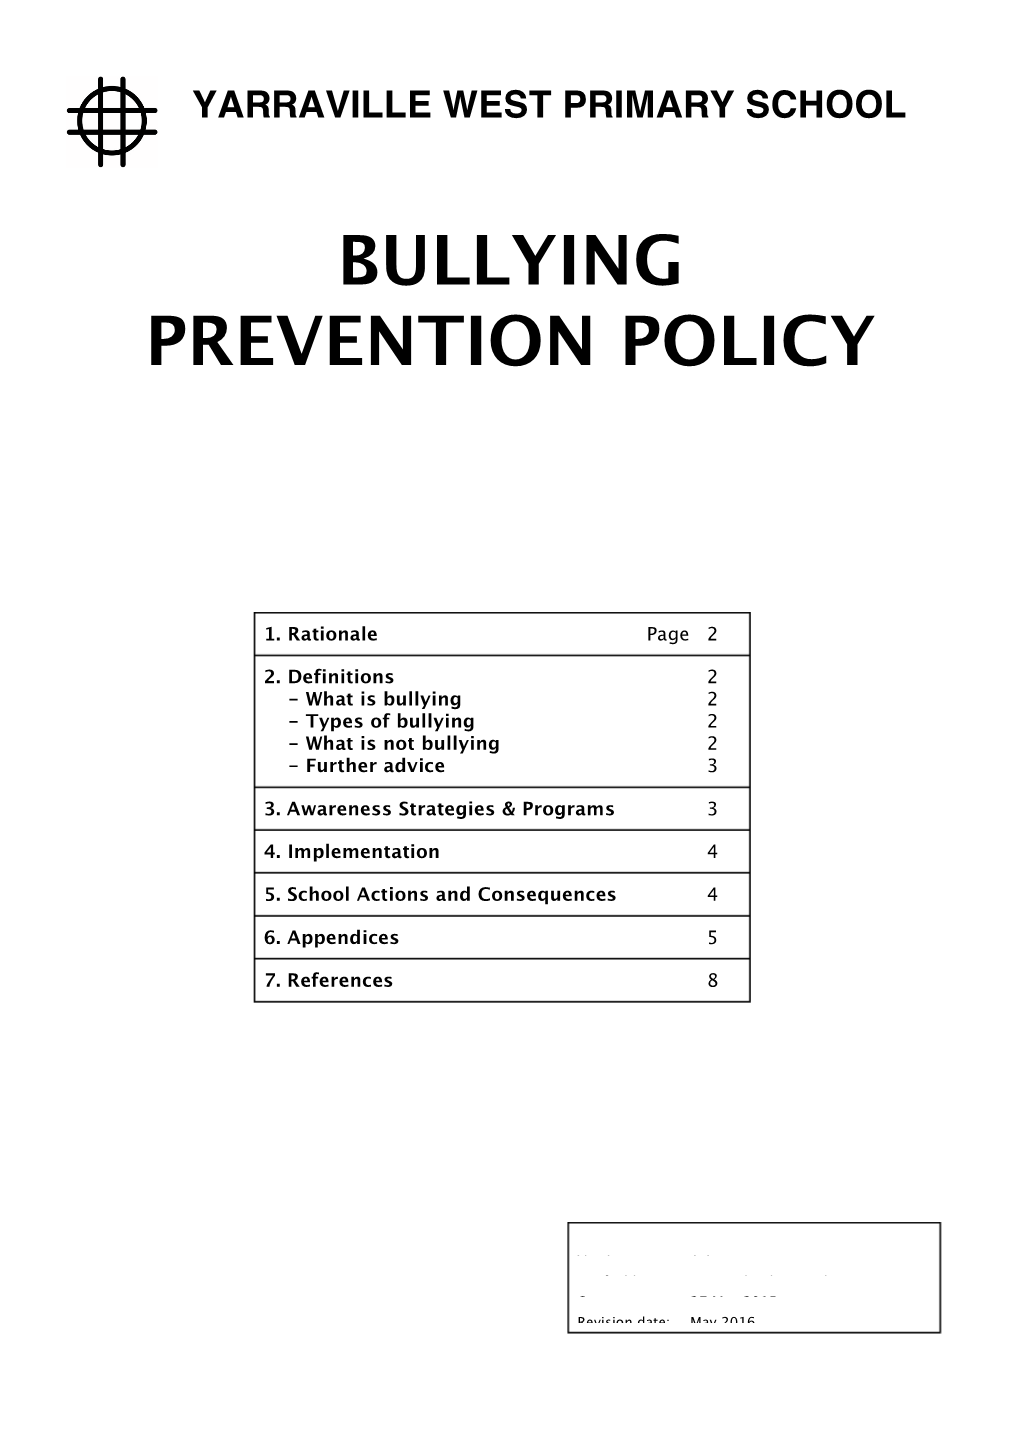 Bullying Prevention Policy